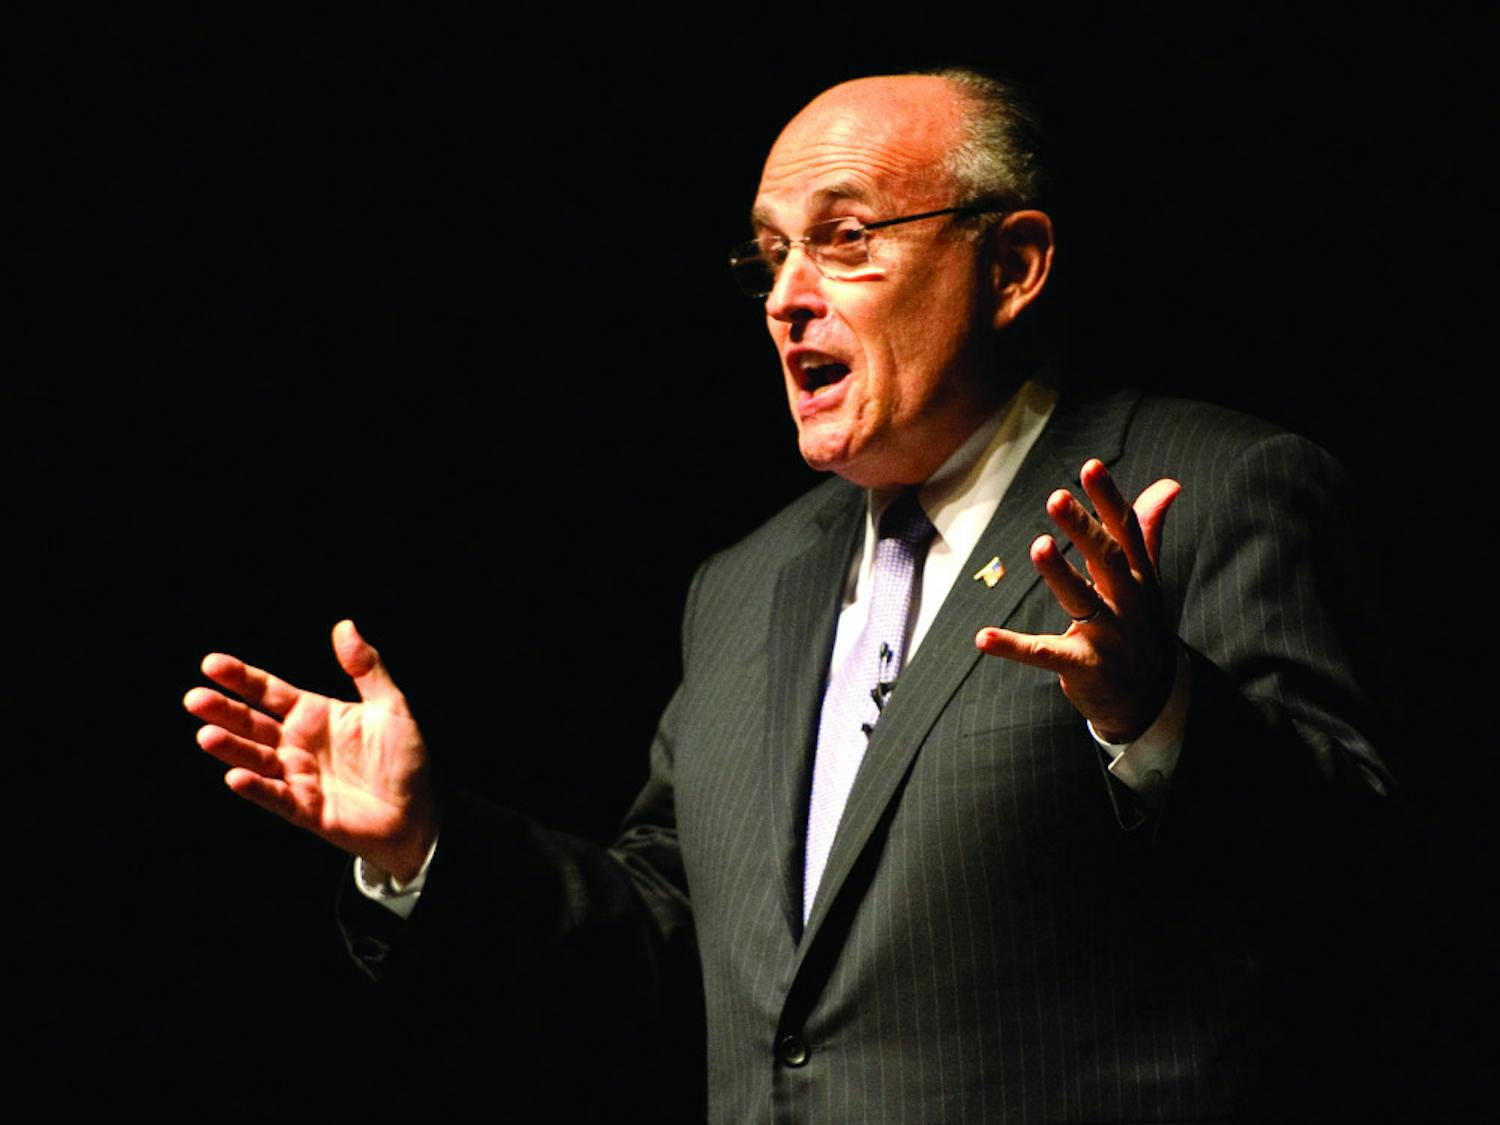 Rudy Giuliani speaks at the Phillips Center for the Performing
Arts on Thursday evening. The Accent Speakers' Bureau event was
free and open to the public.